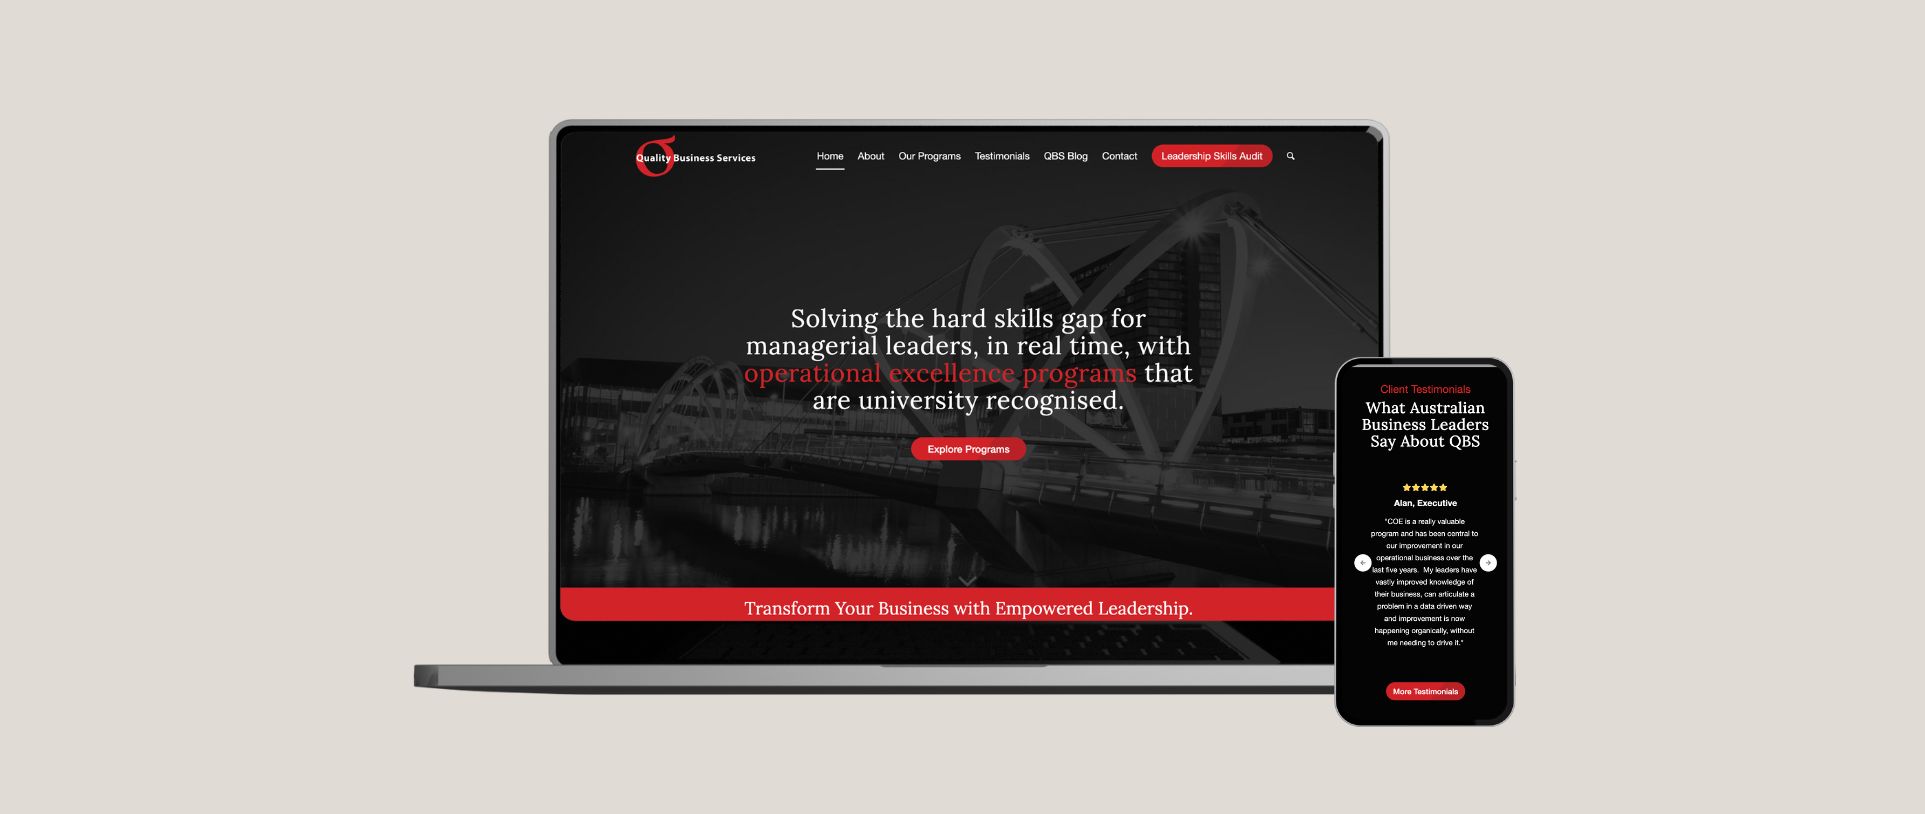 The new website of Quality Business Services. Image curtesy of Done Digital.